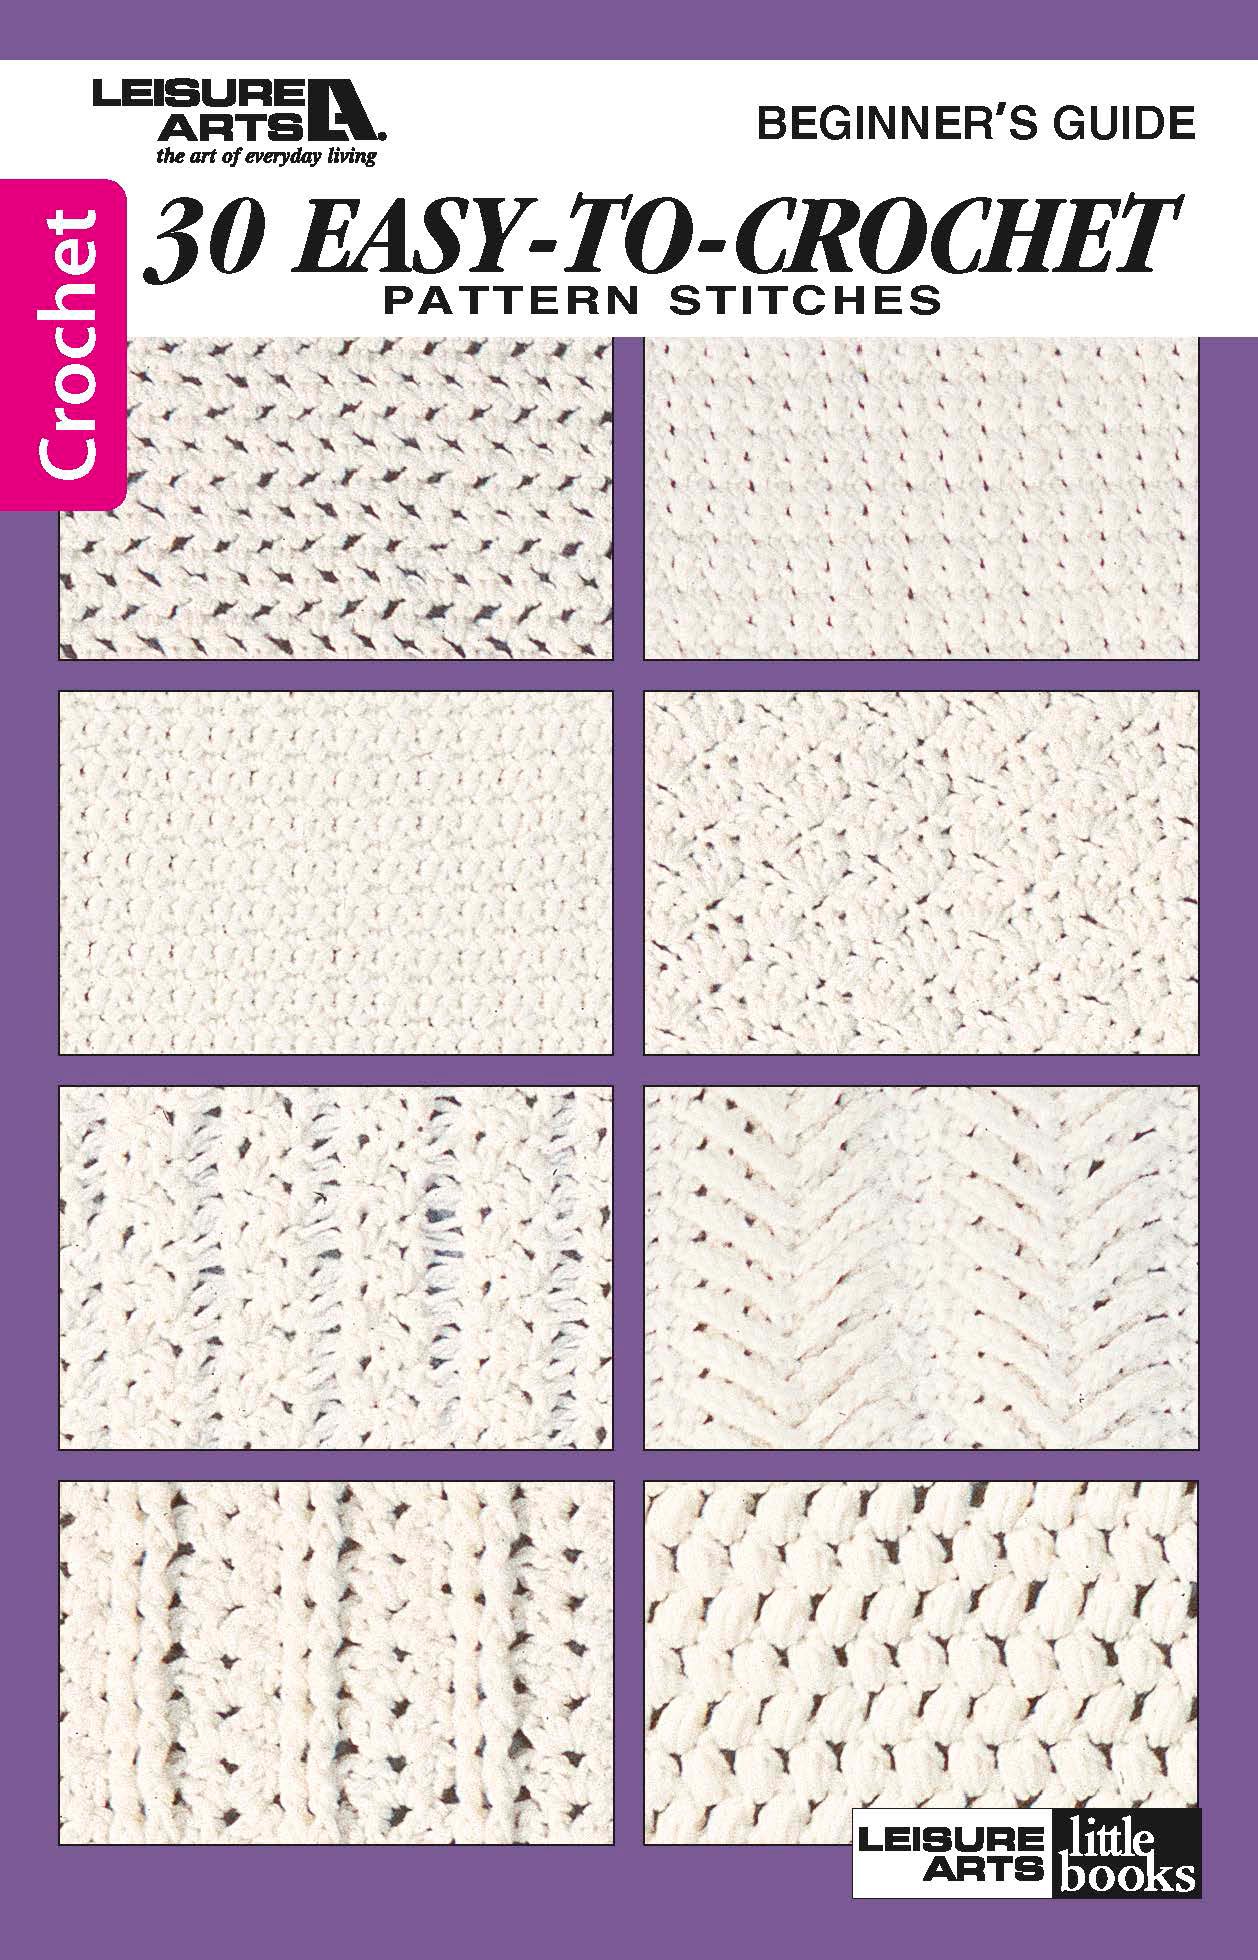 Learn to Crochet for Beginners Booklet - Life on Leetown